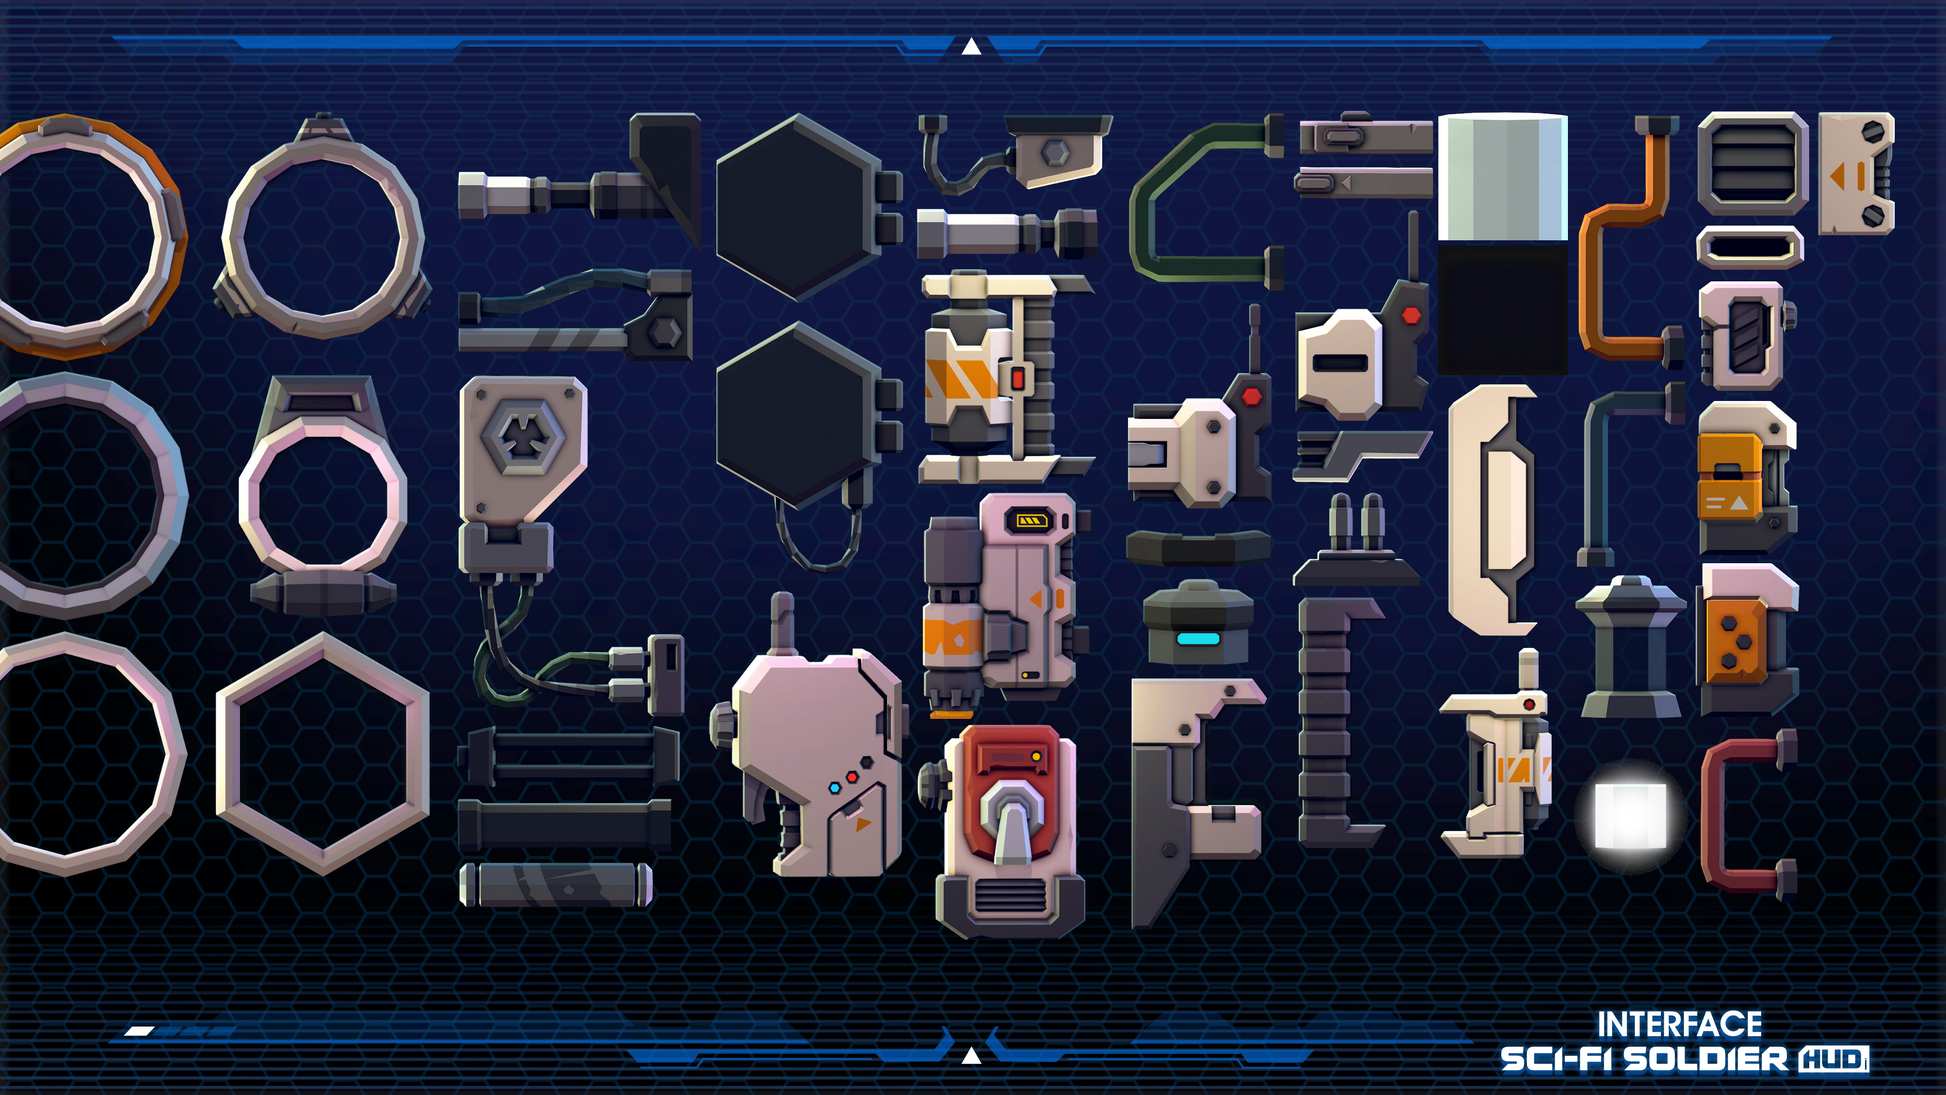 Engine component sprites from the INTERFACE Sci-Fi Soldier HUD asset pack